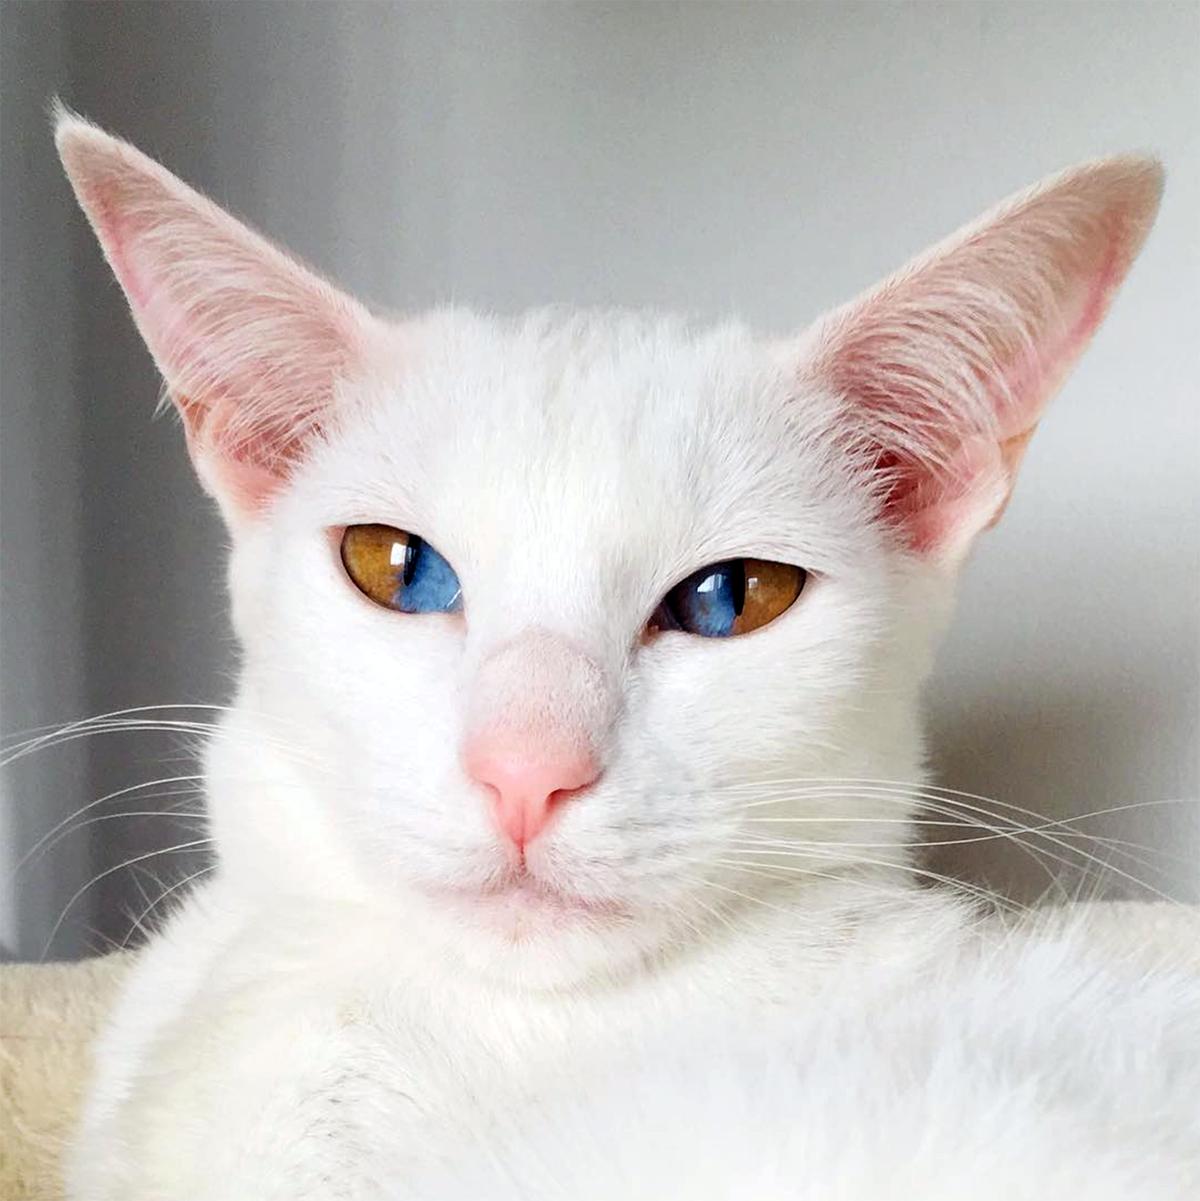 Olive has a genetic condition that means both her eyes are different-colored. (Caters News)